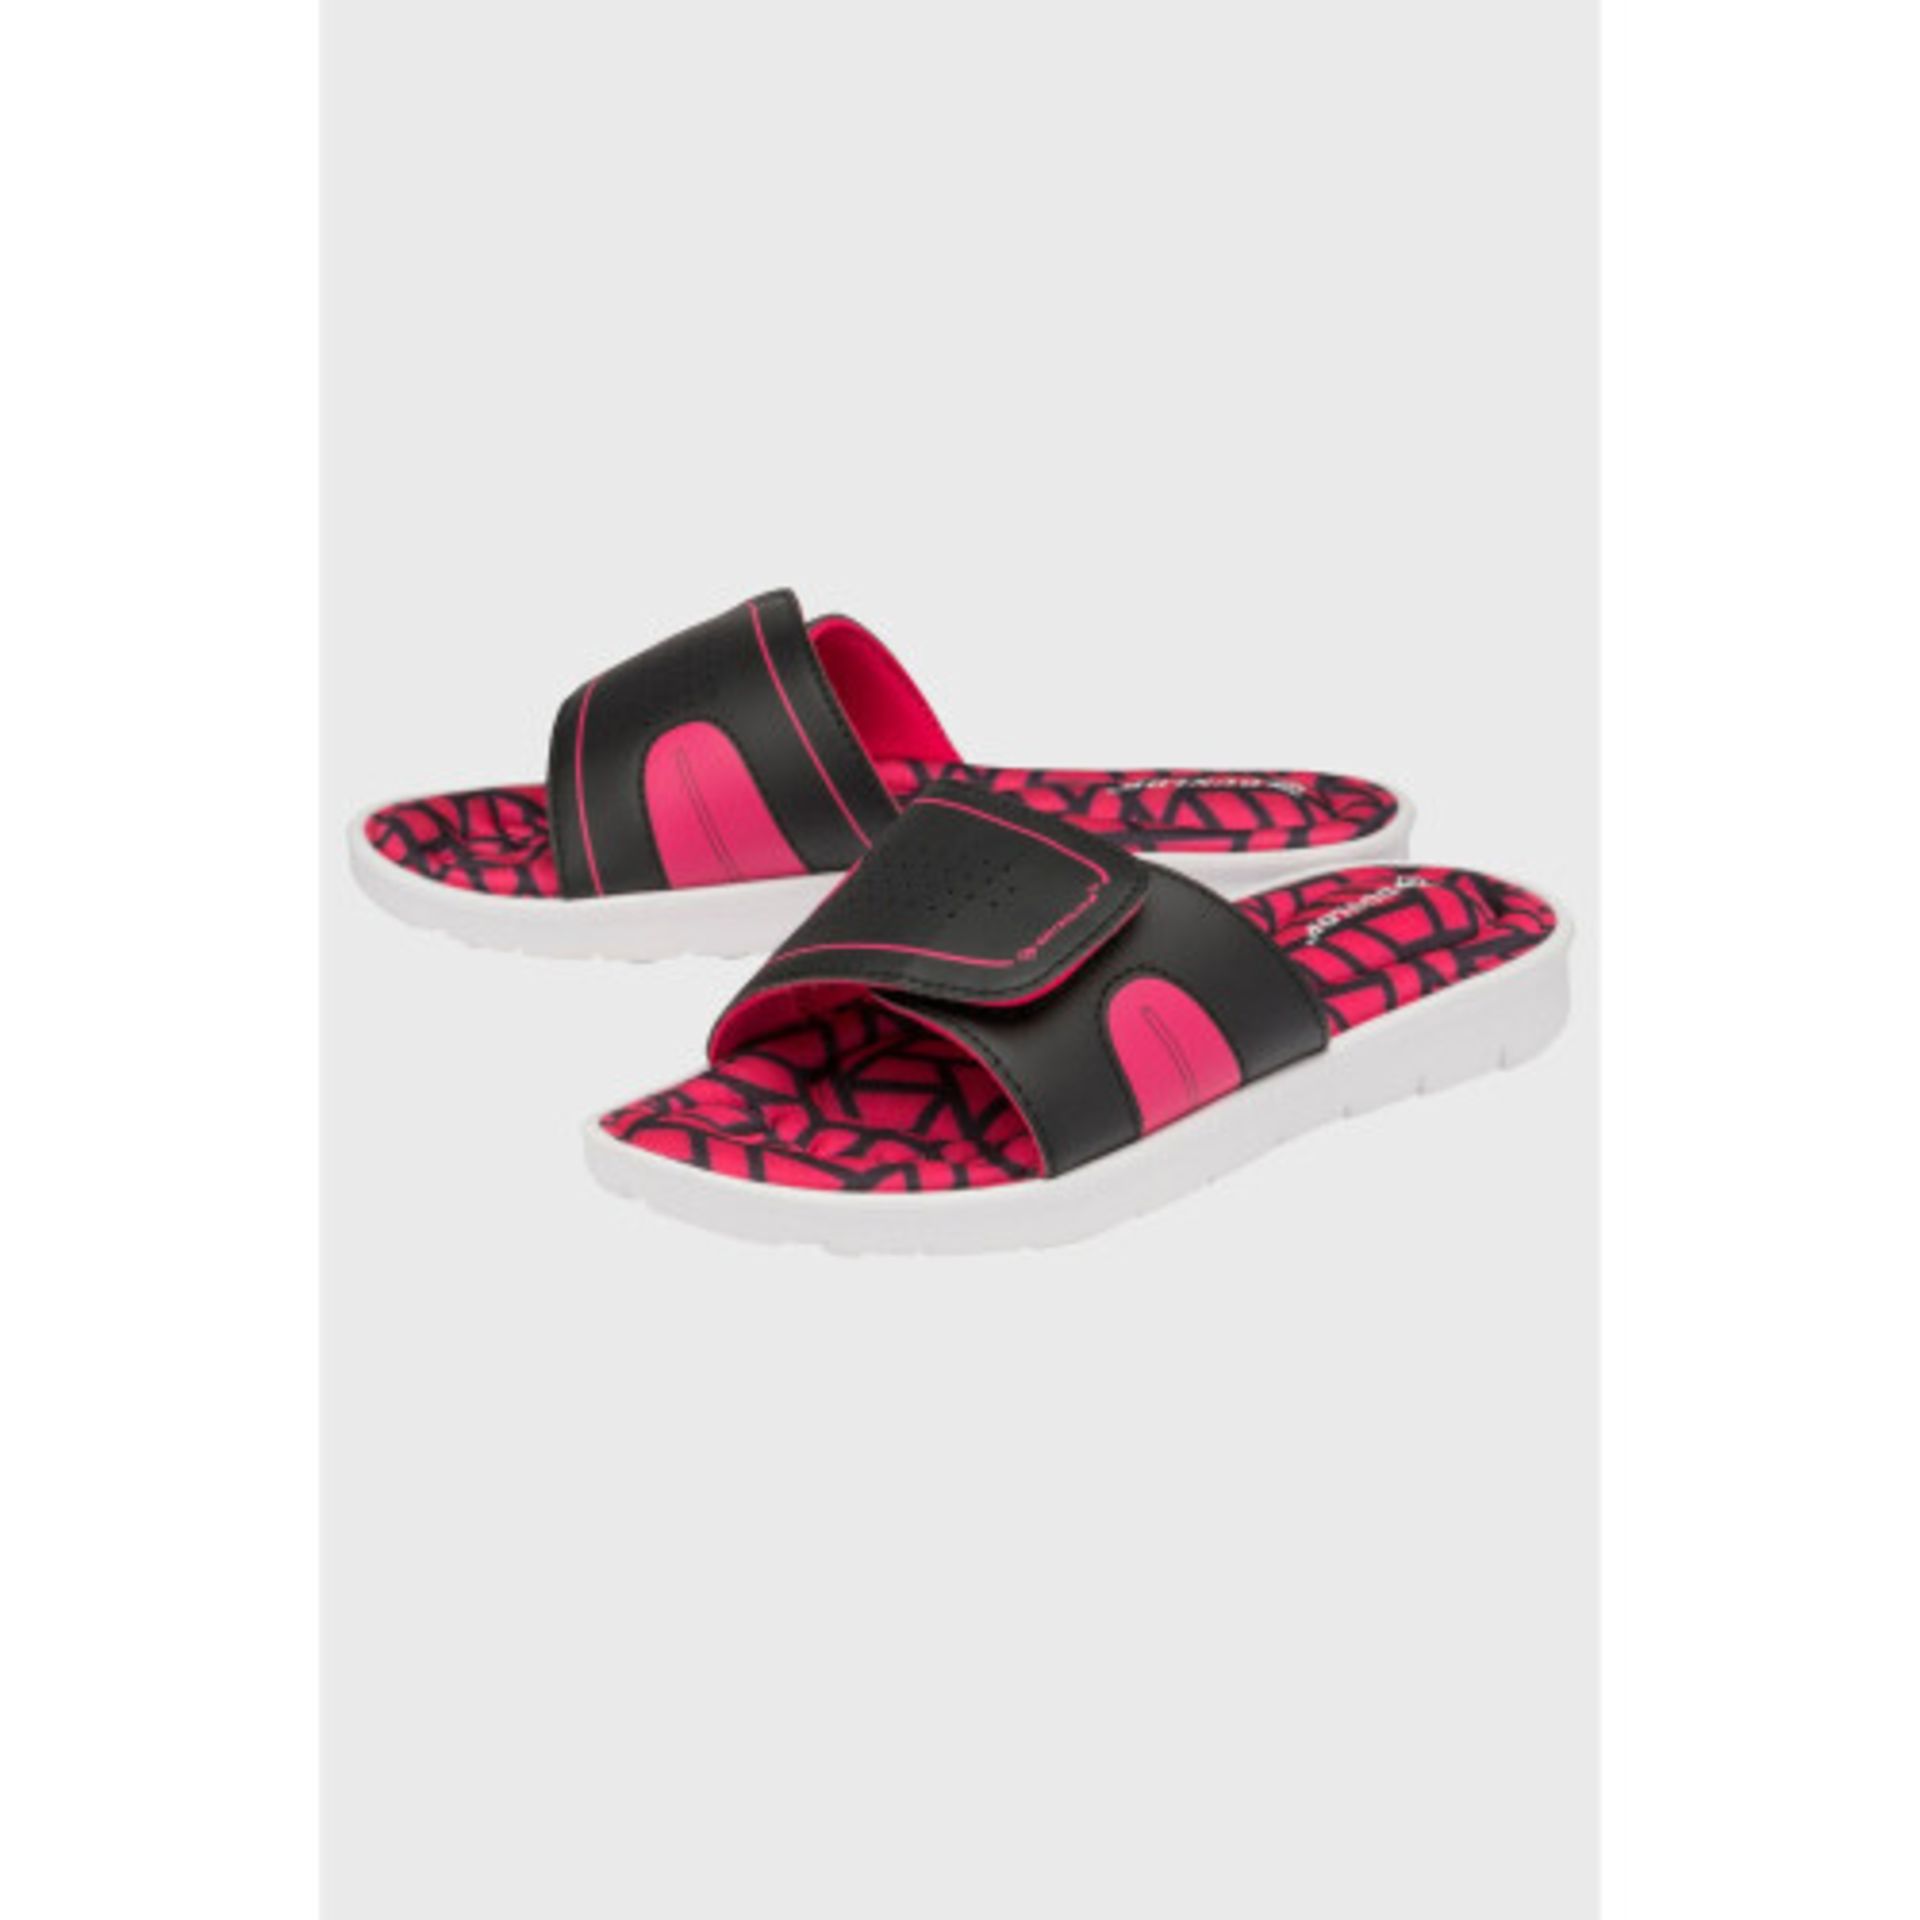 14 X BRAND NEW DUNLOP ADJUSTABLE MEMORY FOAM SLIDERS - ALL IN BLACK AND FUCHSIA - IN VARIOUS SIZES